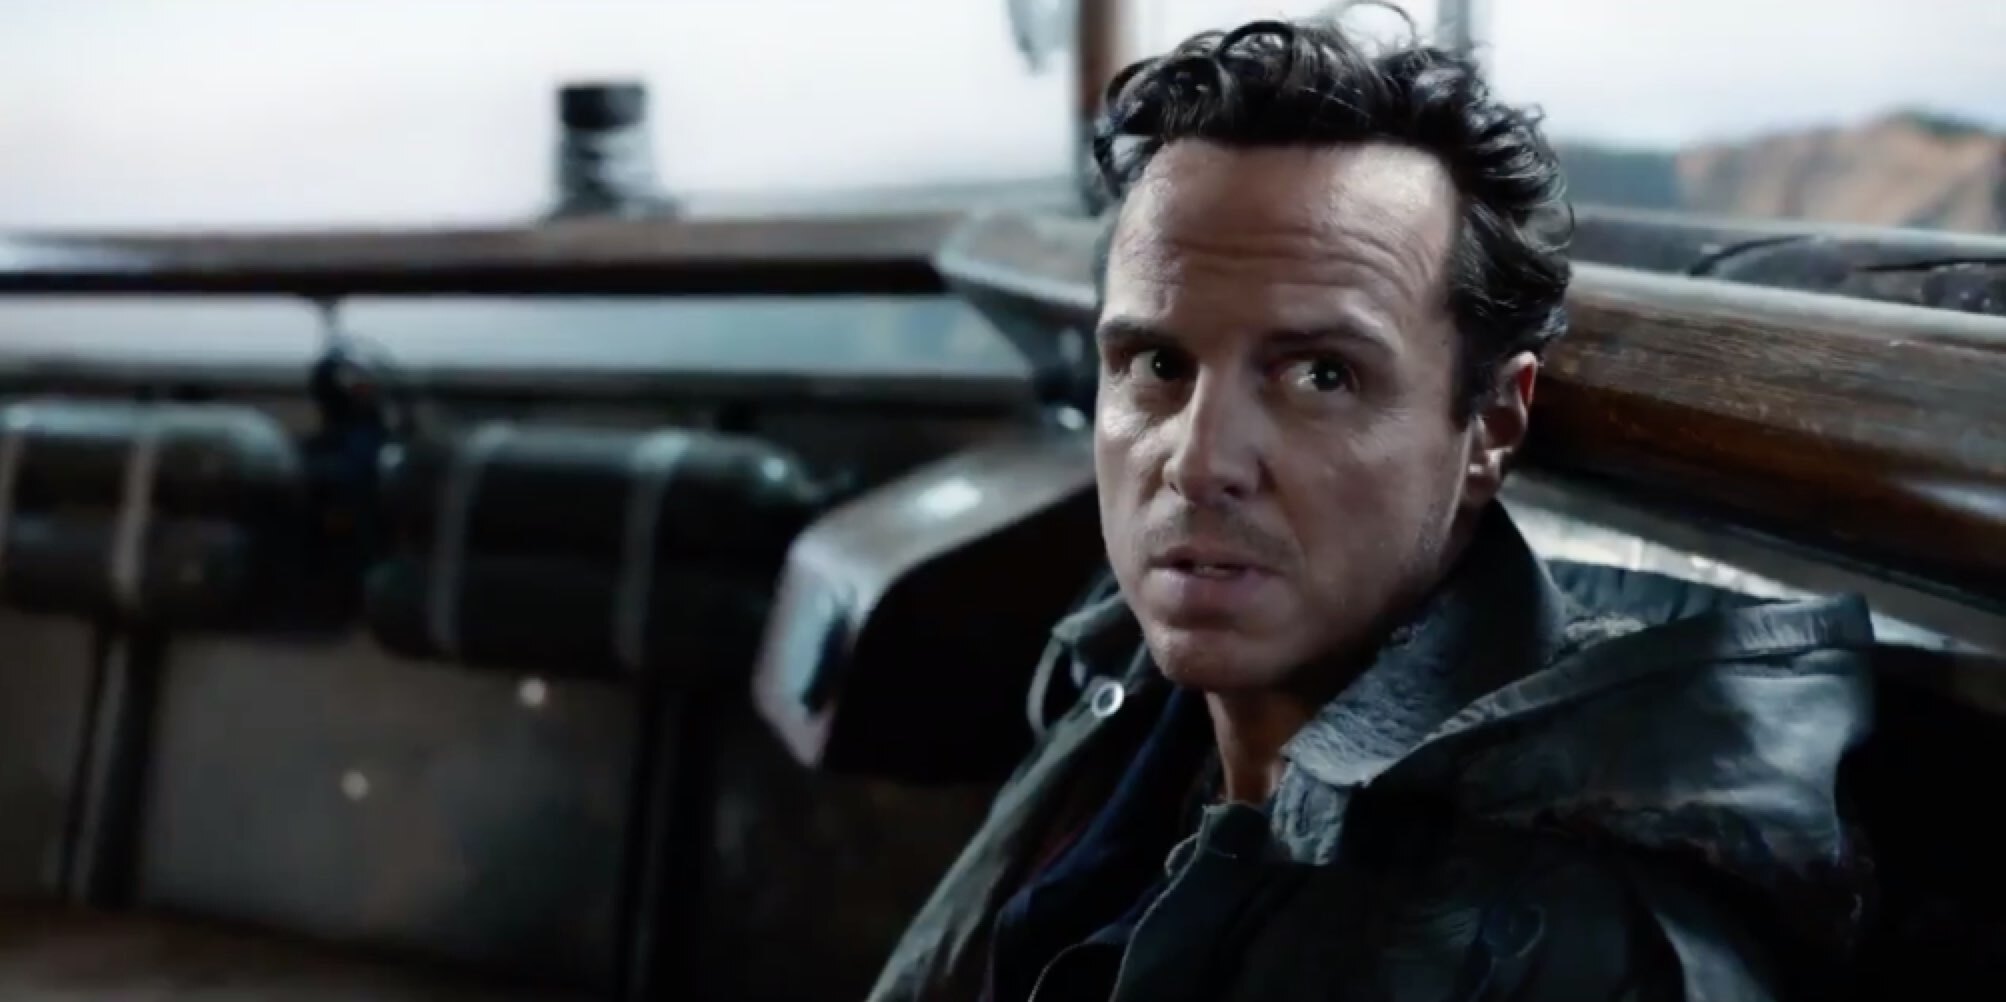 'His Dark Materials' got the okay for a season 3 from HBO, so we're celebrating the only way we know: an Andrew Scott appreciation post. 